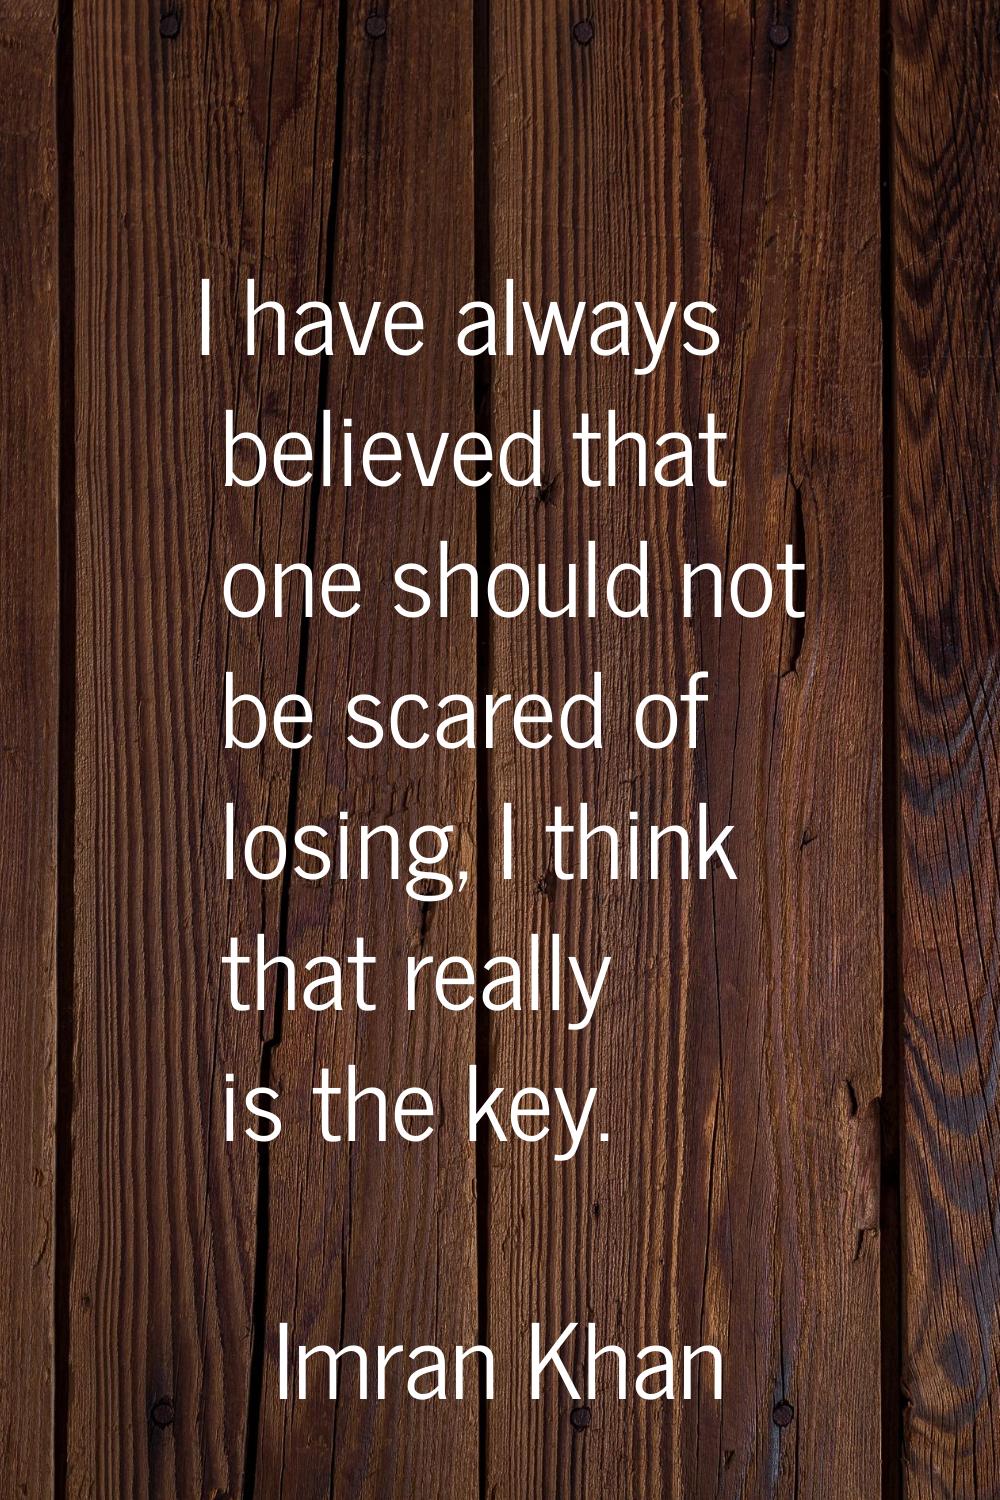 I have always believed that one should not be scared of losing, I think that really is the key.